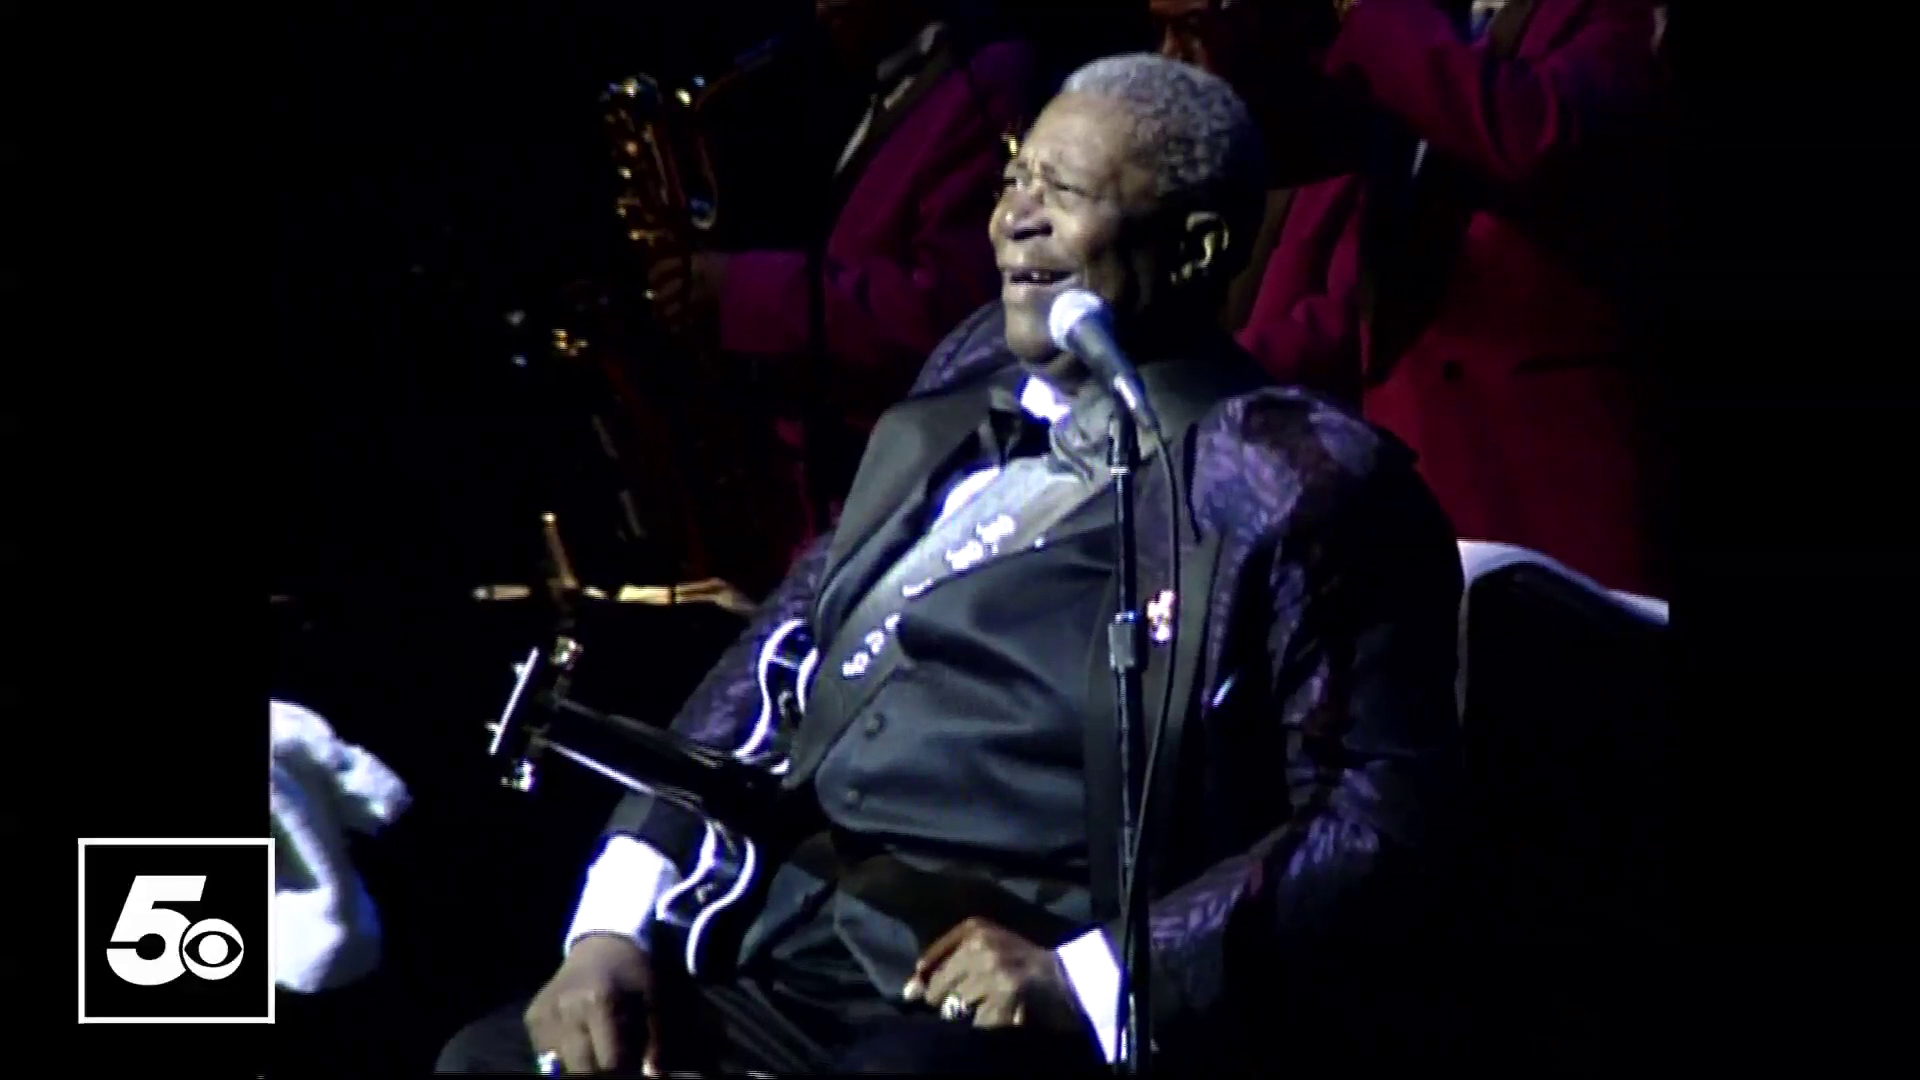 During a visit to Fayetteville, Ark., in 2000, BB King recounted the time he rushed into a burning building to rescue his beloved guitar.